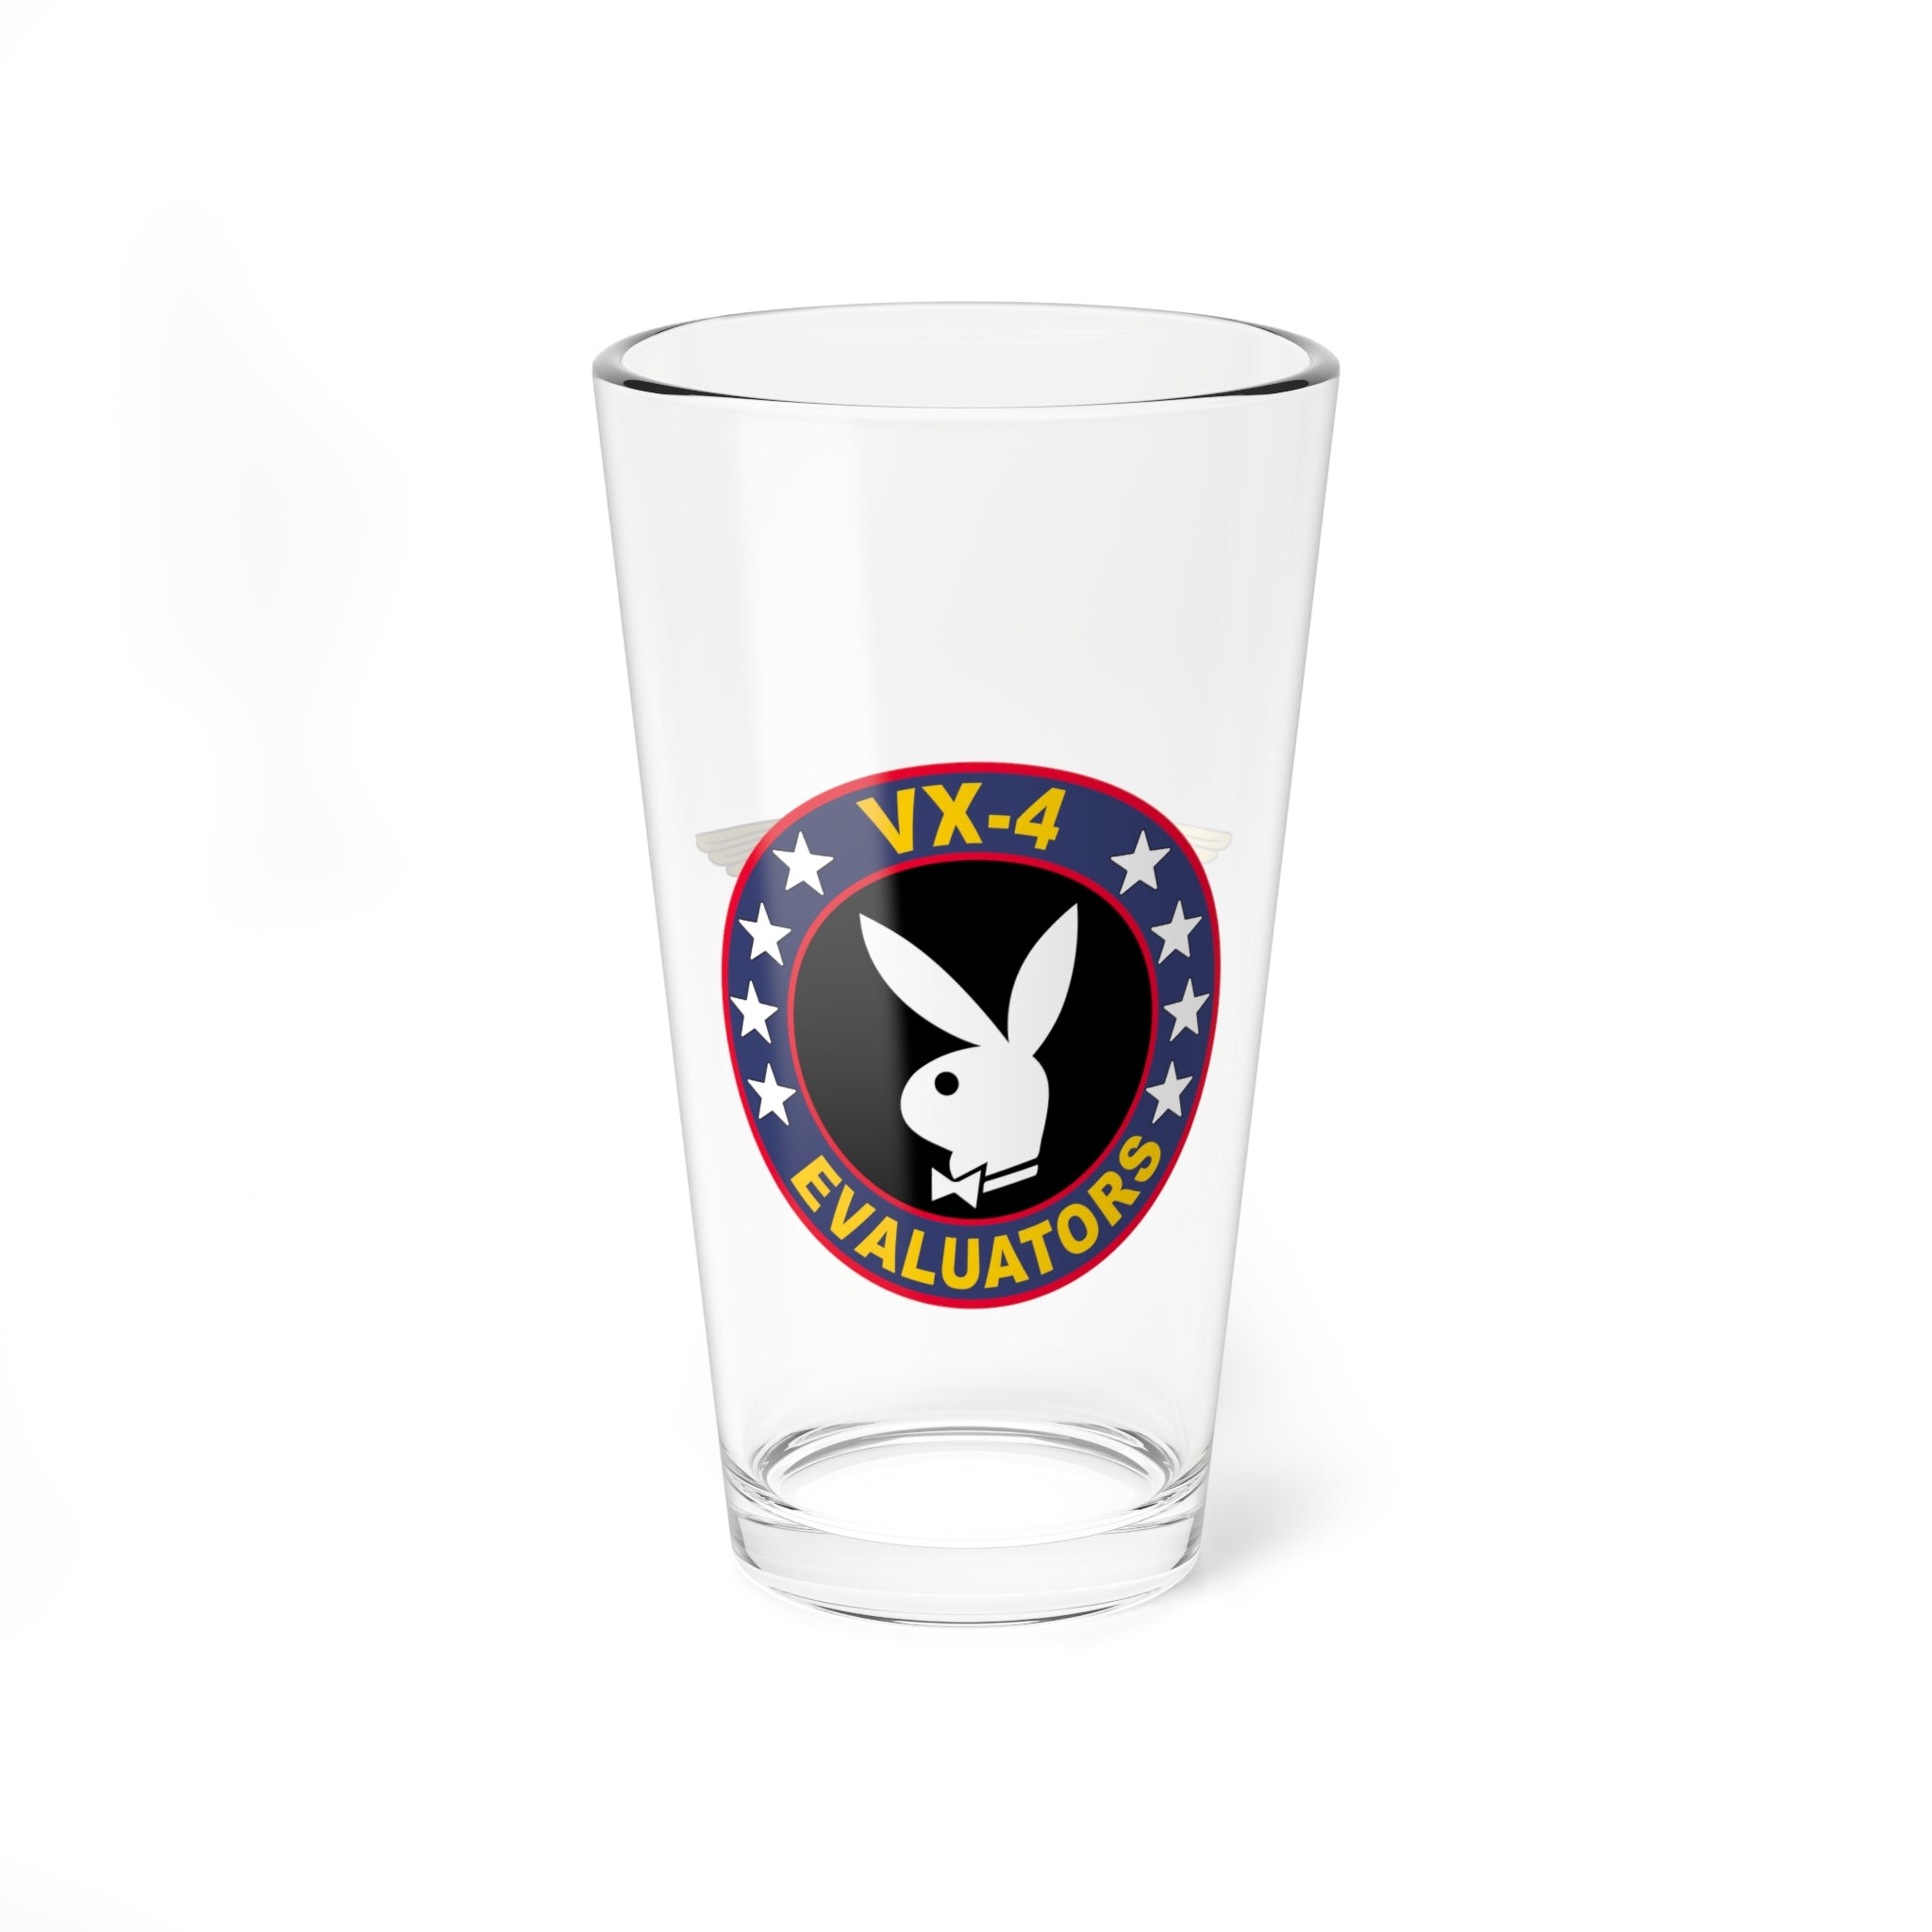 VX-4 "Evaluators" NFO Pint Glass, Navy Strike Fighter Test and Evaluation Squadron